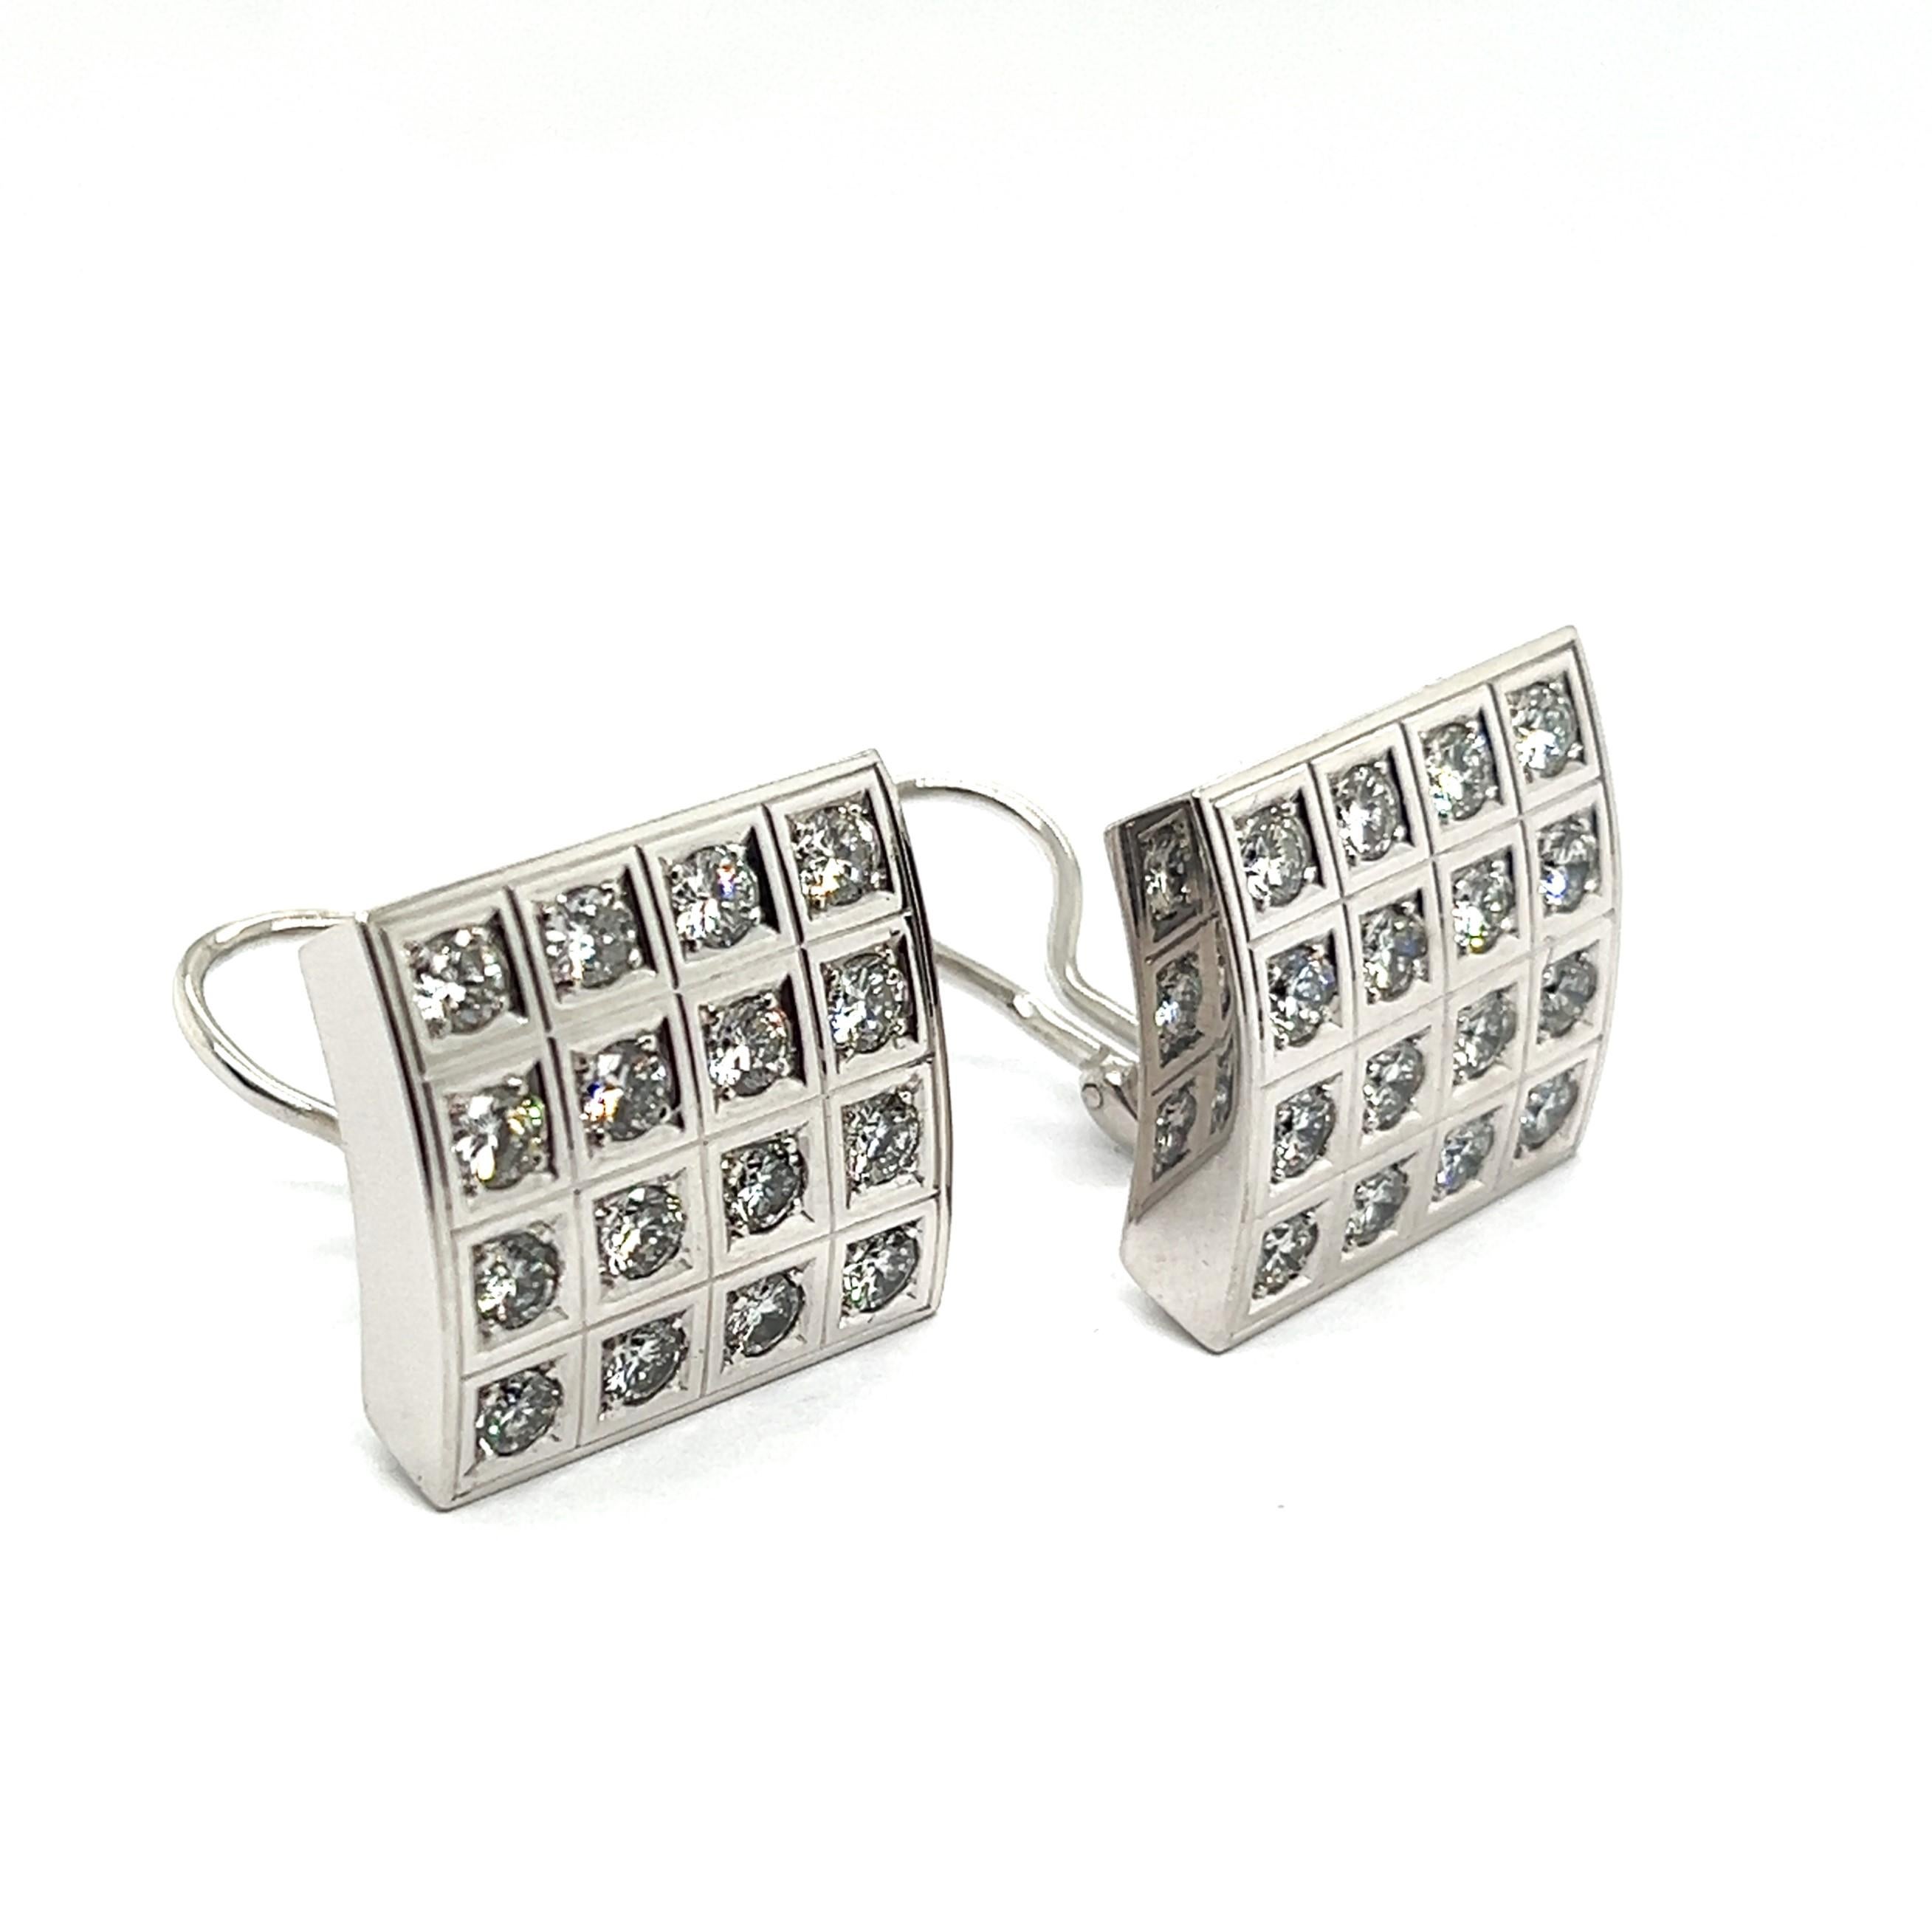  Bold Graphic Earrings with Diamonds in 18 Karat White Gold by Majo Fruithof In Excellent Condition For Sale In Lucerne, CH